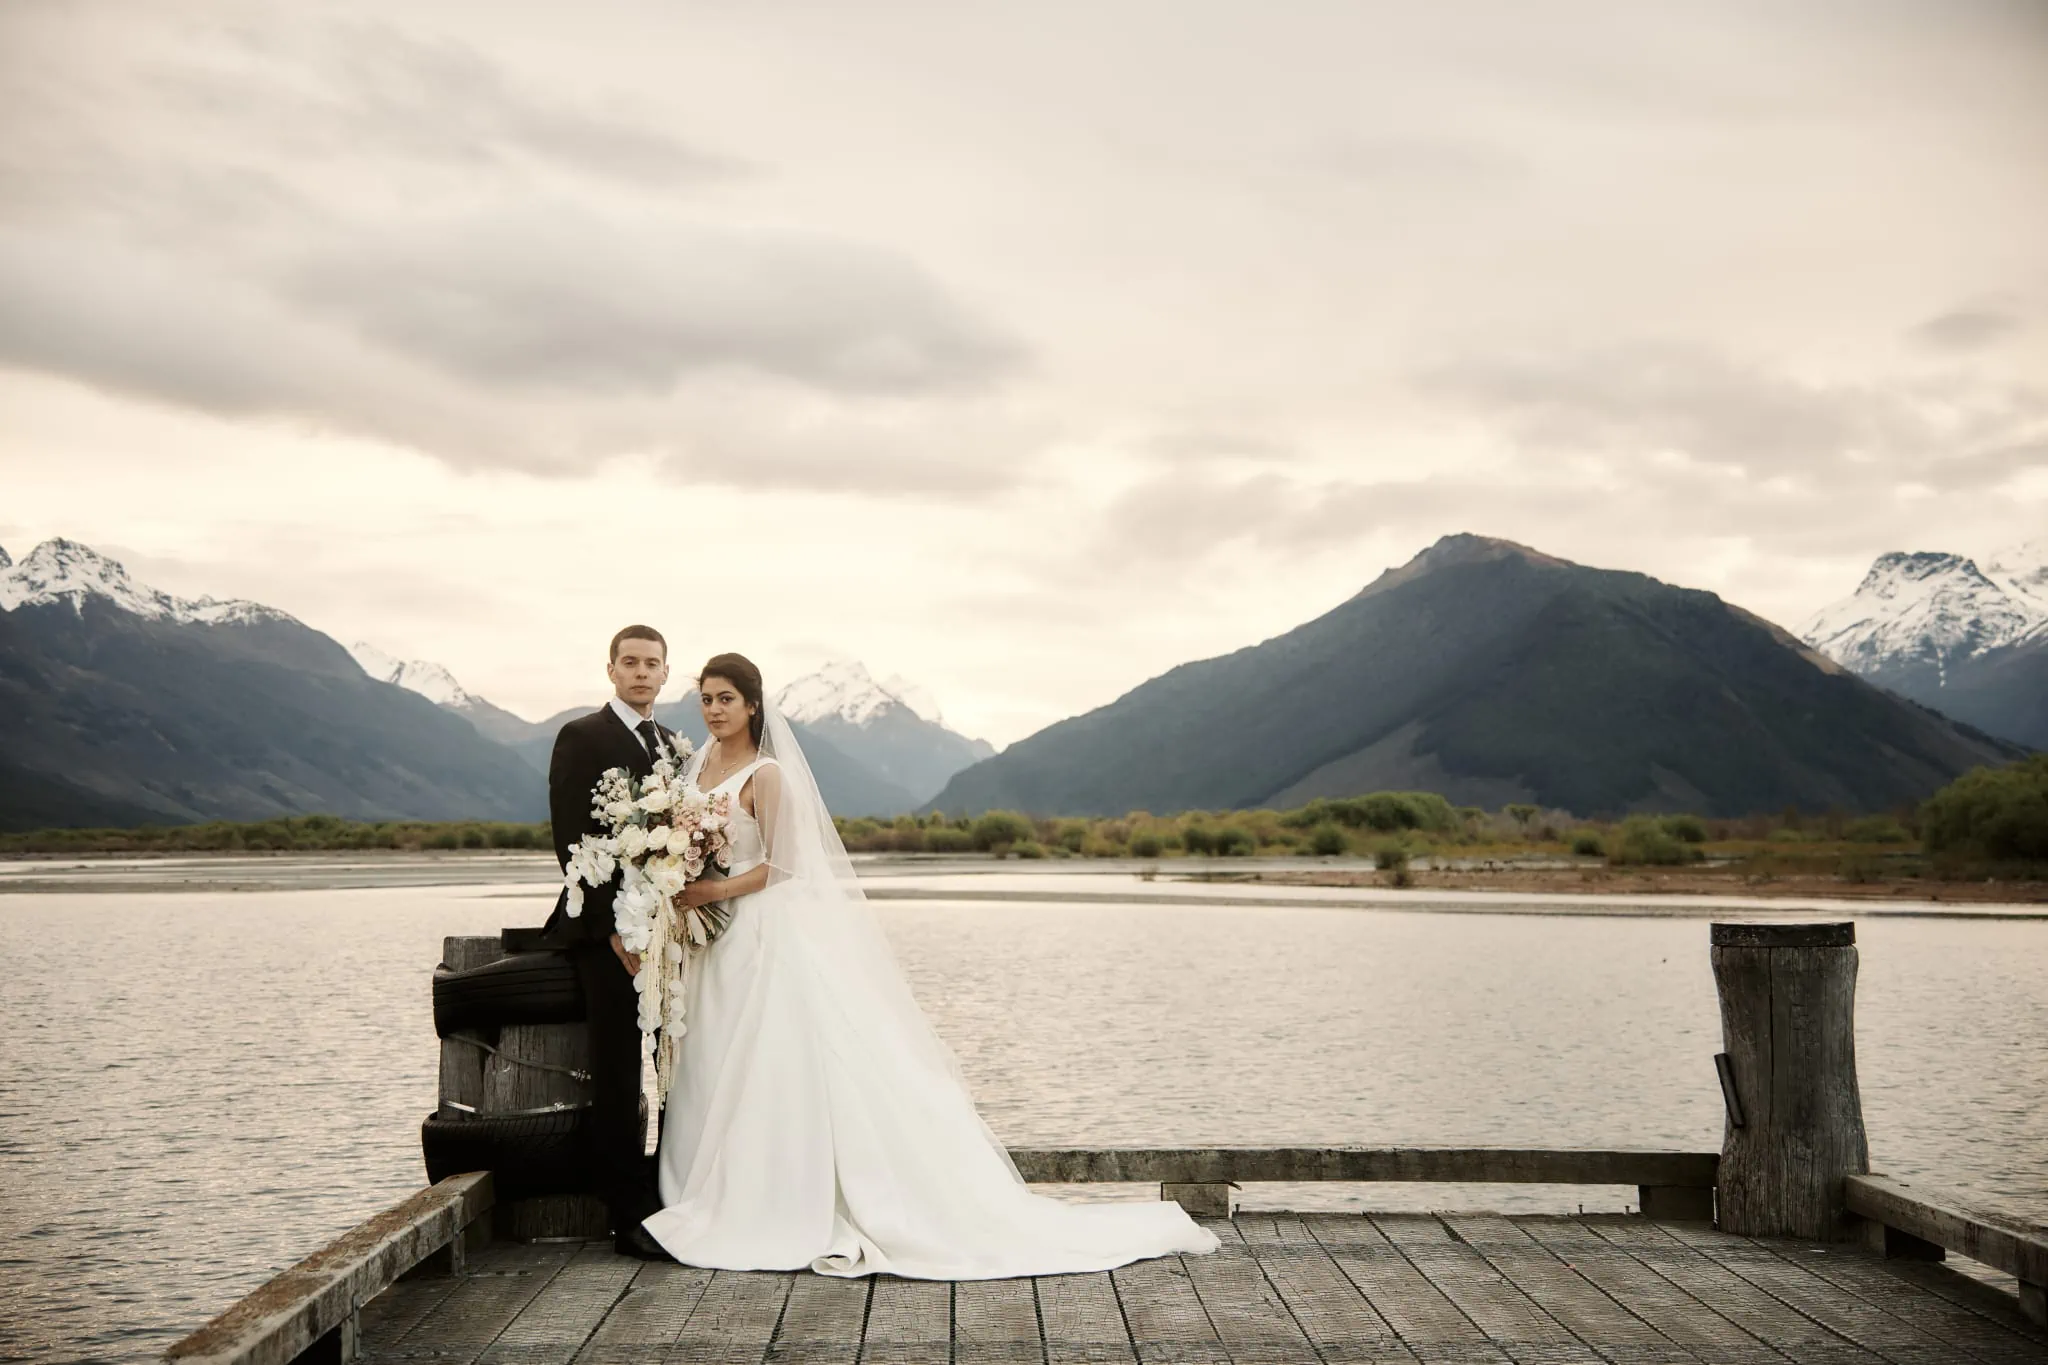 Michelle and Vedran celebrate their Rees Valley Station elopement wedding on a dock with breathtaking mountain views.